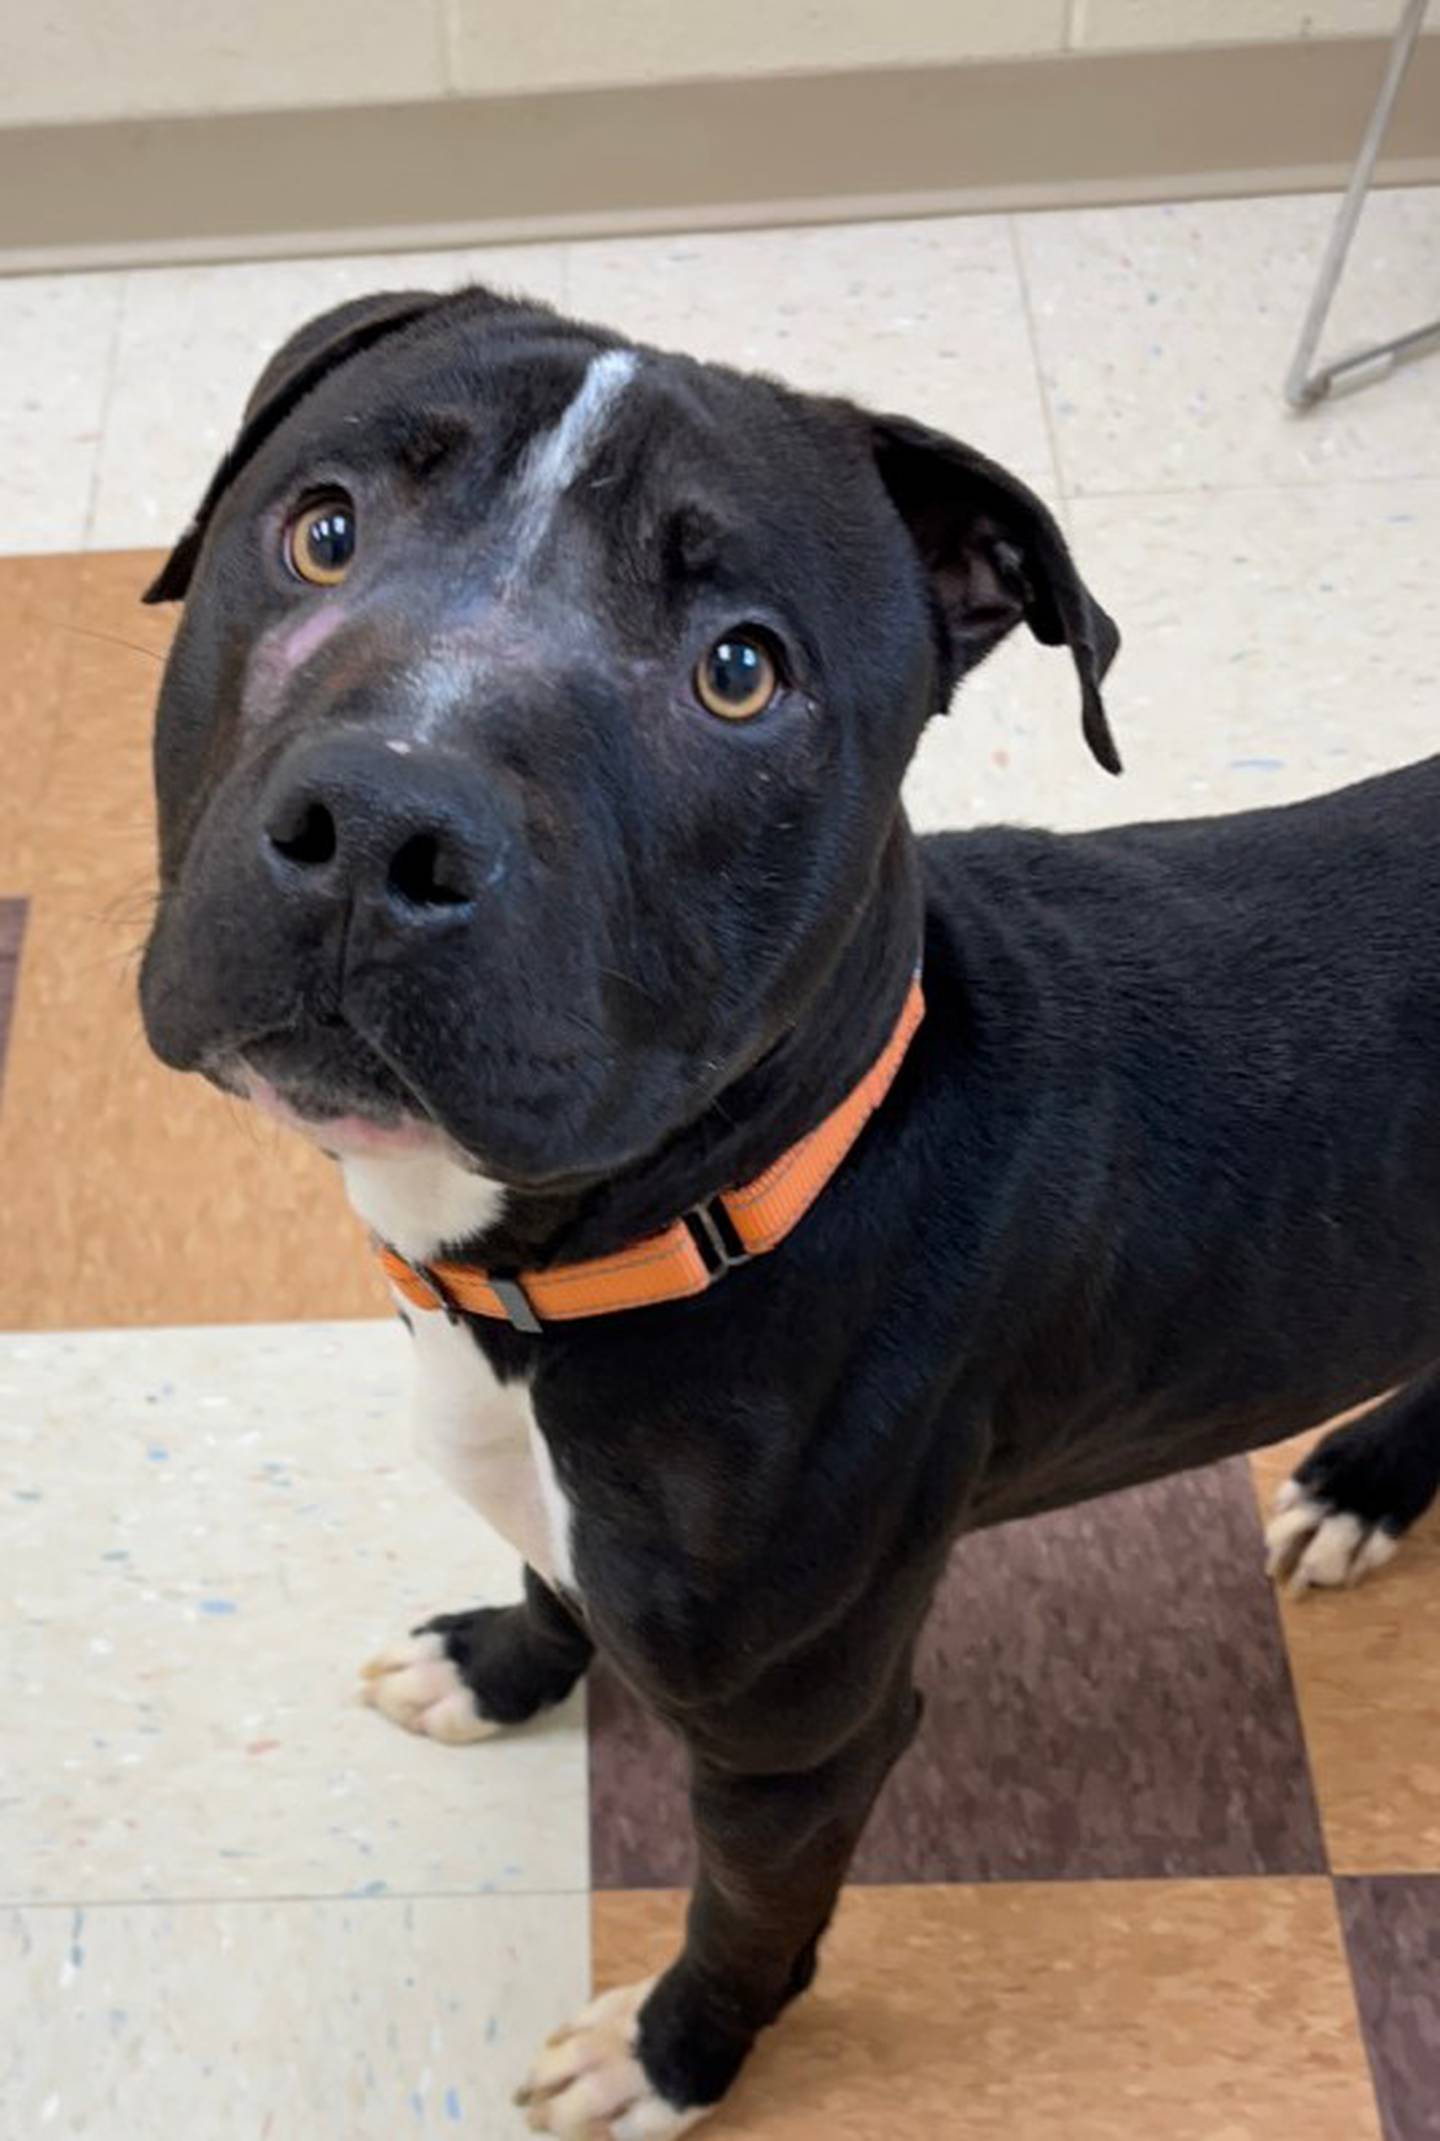 Antonio, a sweet and docile 2-year-old pittie, get along with dogs, cats, and kids. He takes treats gently and lights up at squeaker toys and balls. To meet Antonio, call Joliet Township Animal Control at 815-725-0333.